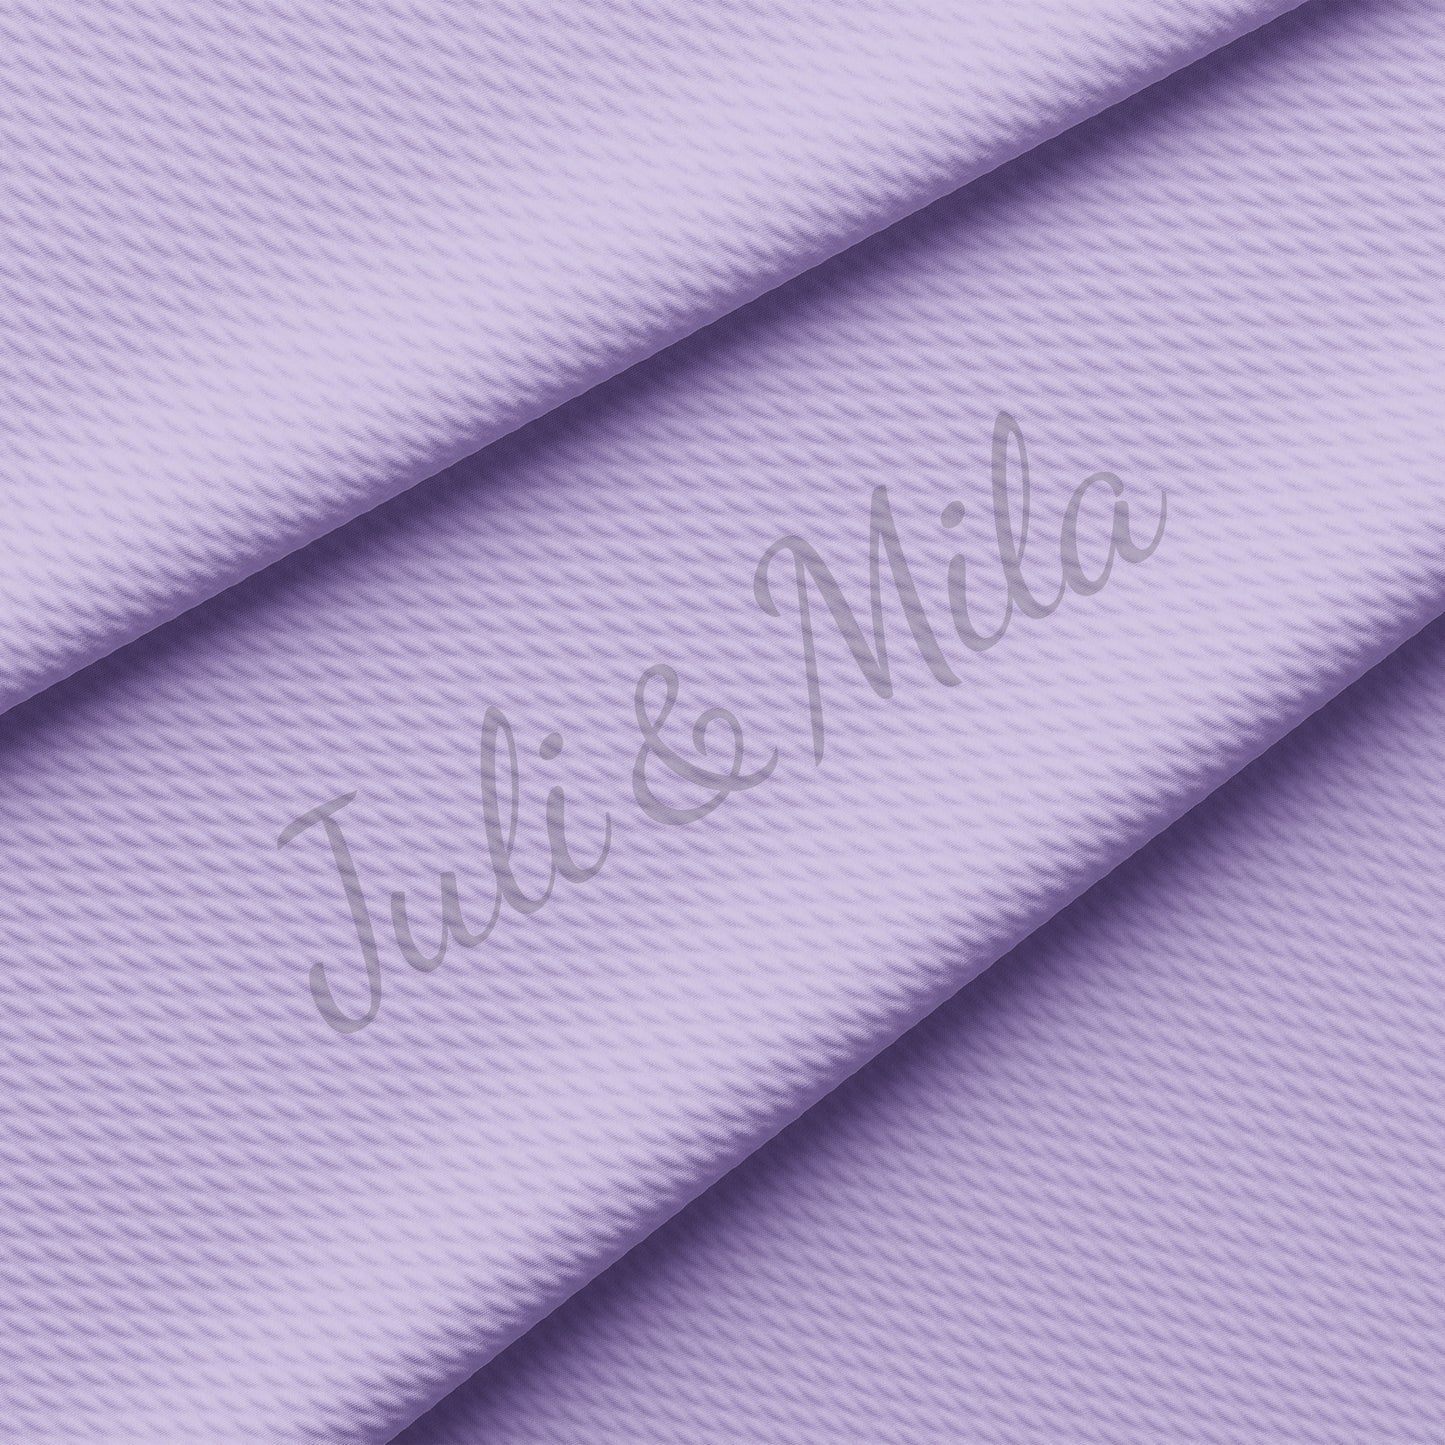 Pastel Lilac Liverpool Bullet Textured Fabric